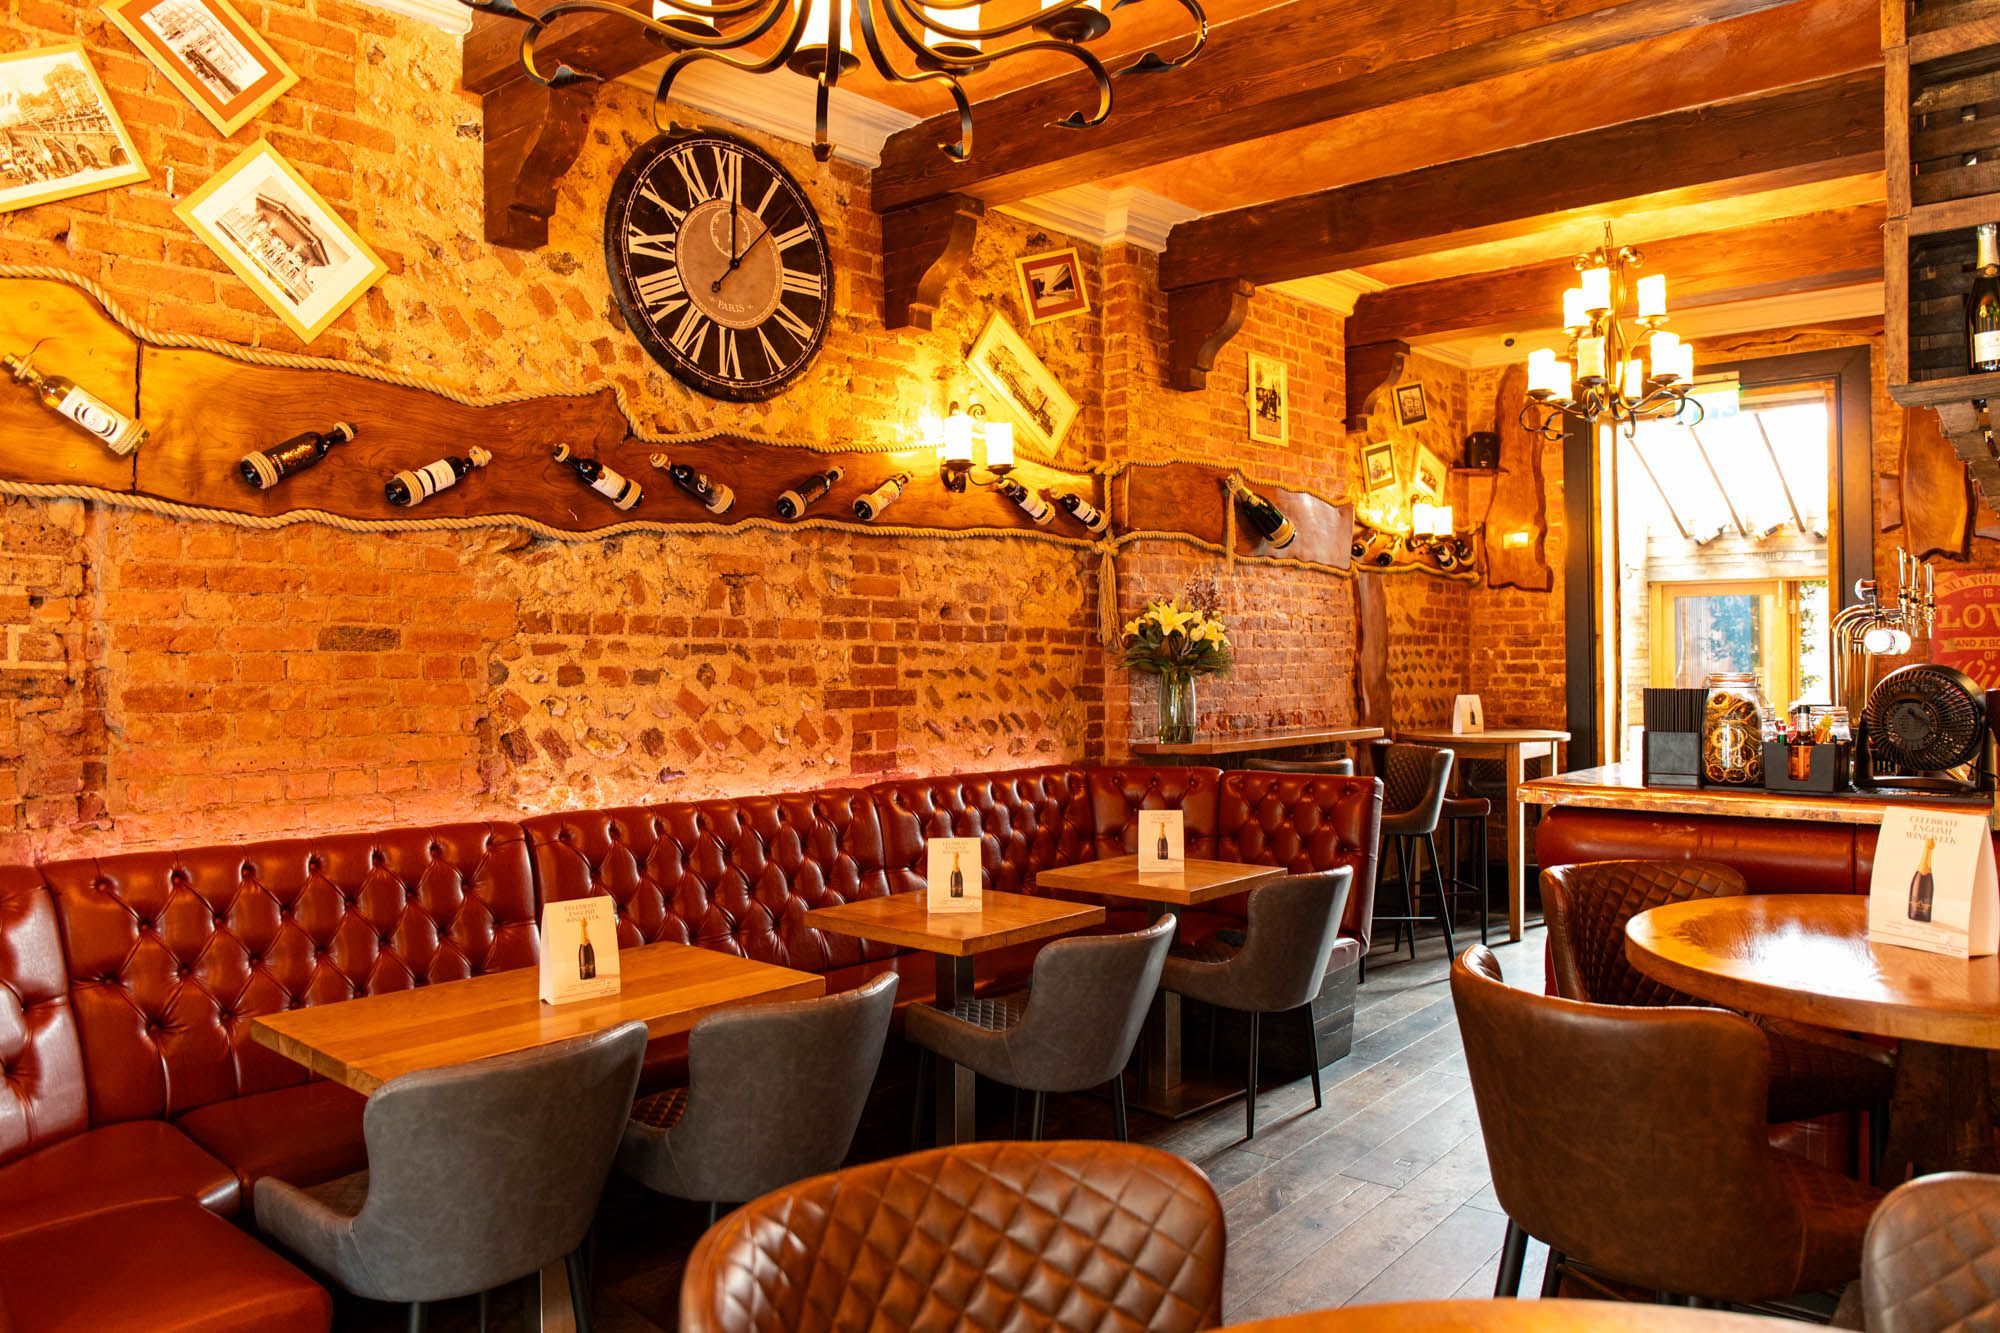 Paris Wine Bar interior shot, brick walls decorated with bottles of wine, diner seating area with chairs, dim lights